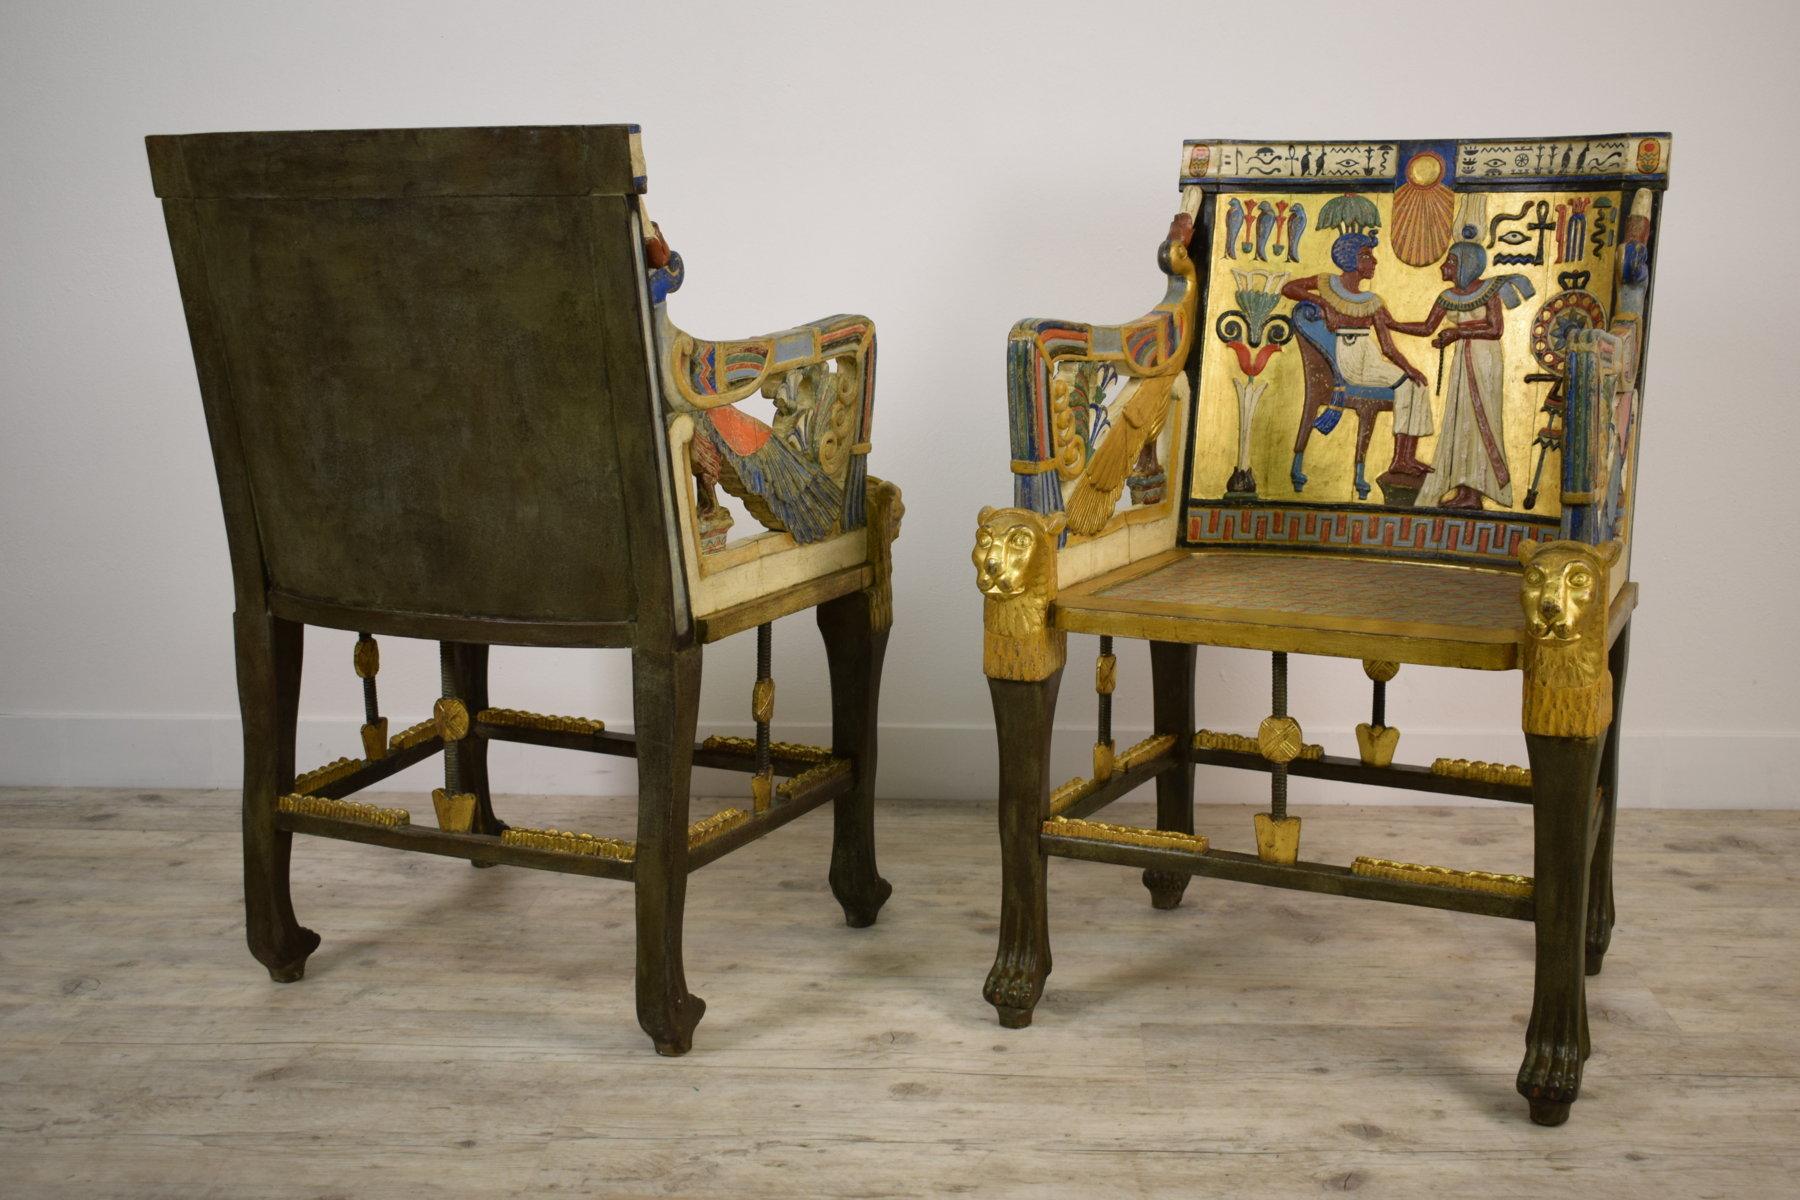 20th Century, Pair of Lacquered Giltwood Armchairs in Egyptian Revival Style For Sale 7